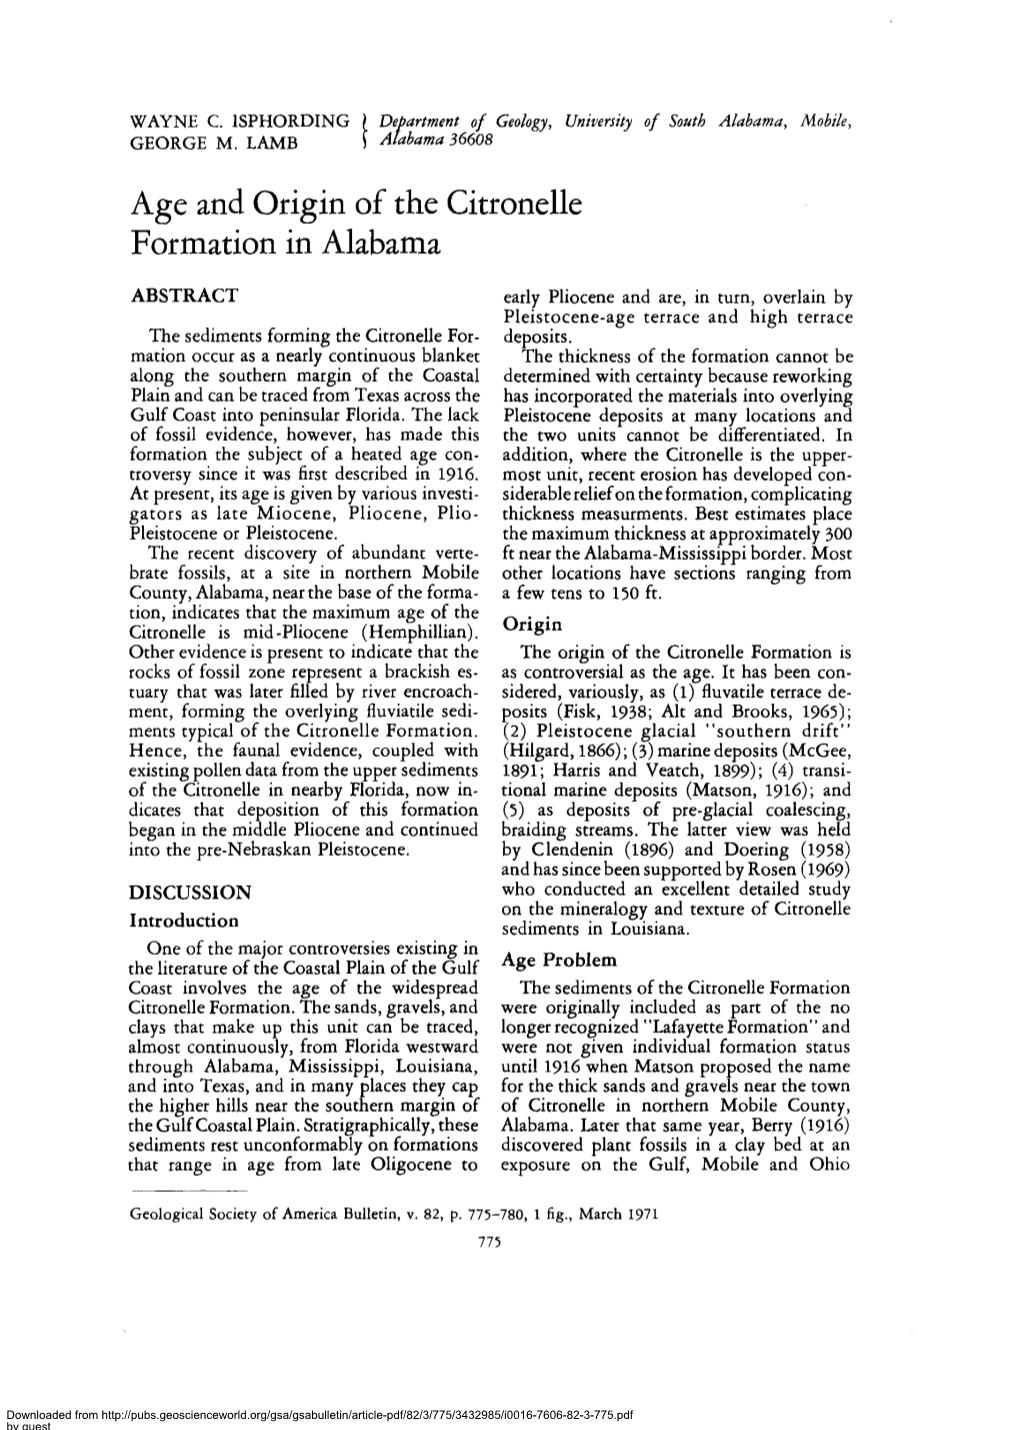 Age and Origin of the Citronelle Formation in Alabama